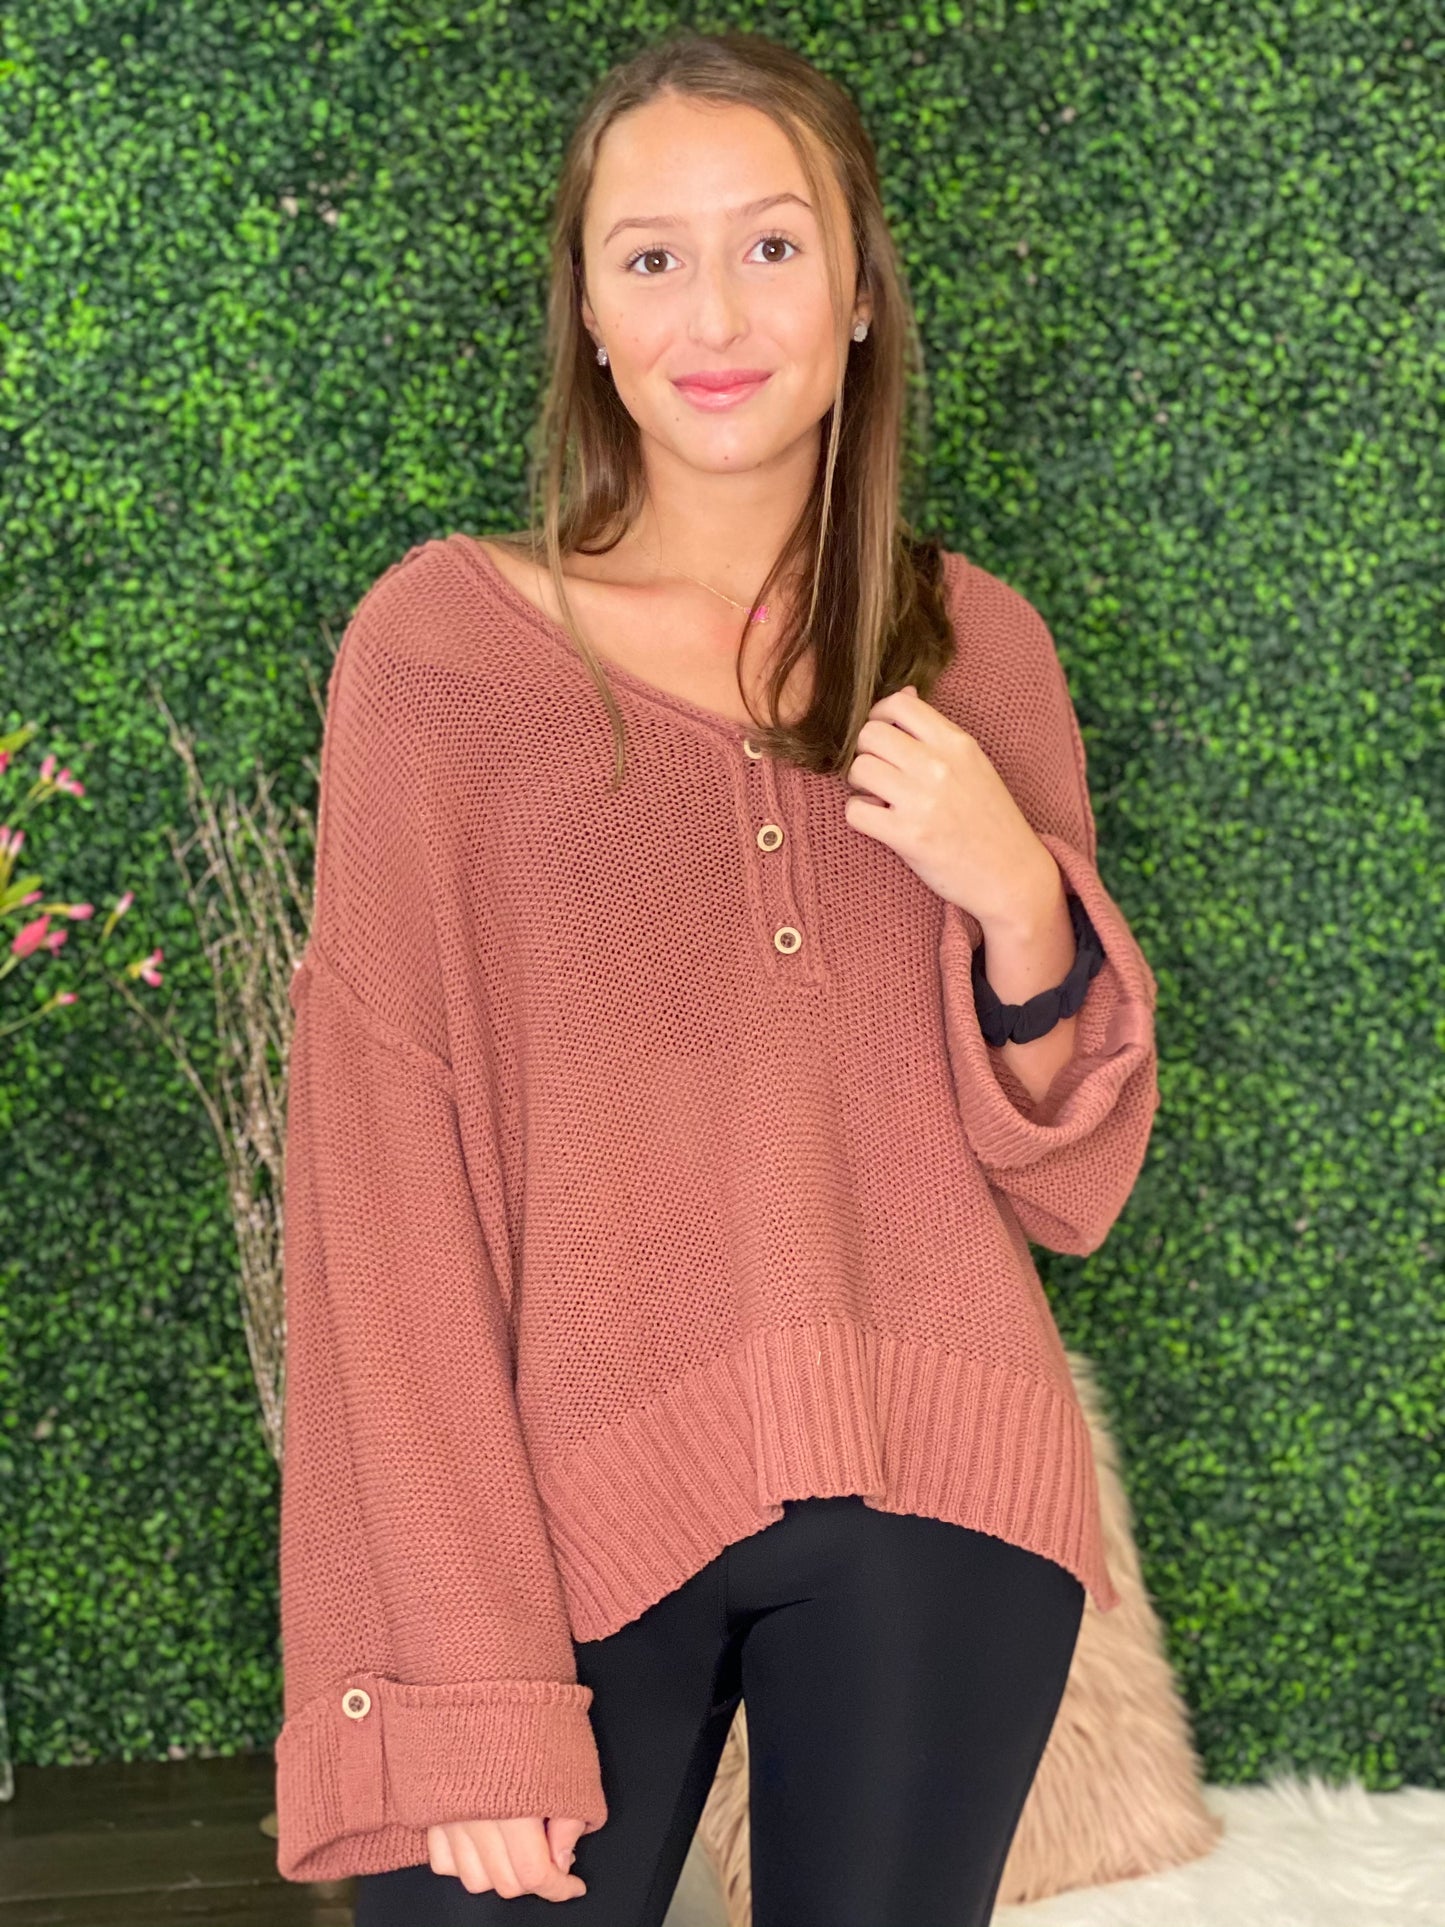 Penelope Cuff Sleeved Button Down Sweater